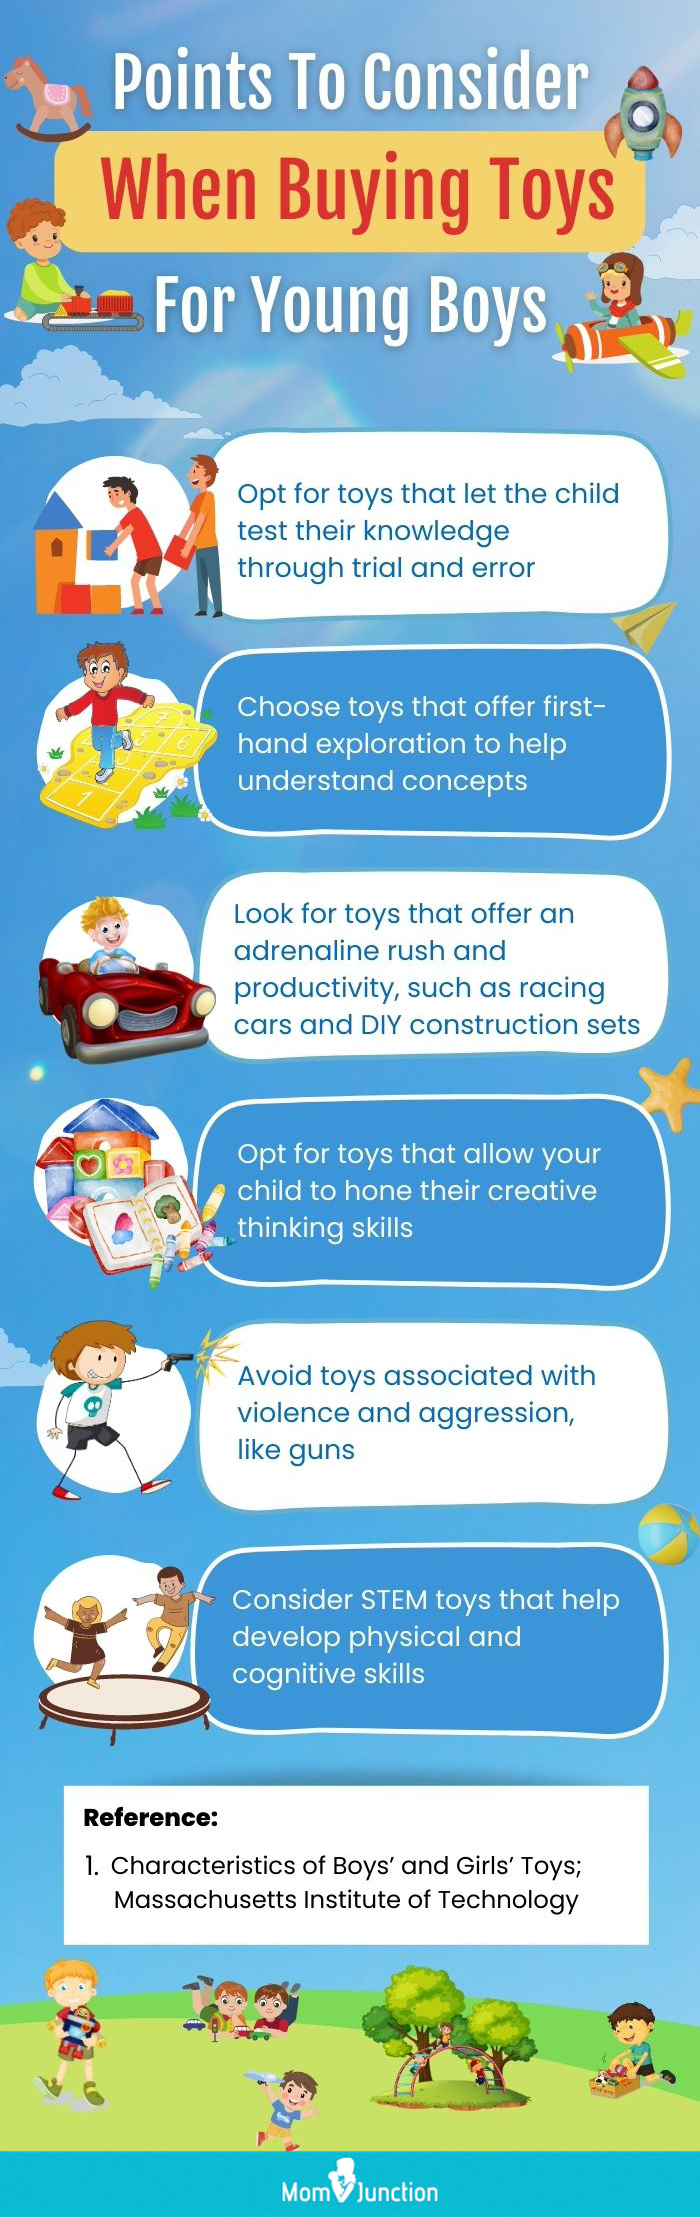 Points To Consider When Buying Toys For Young Boys